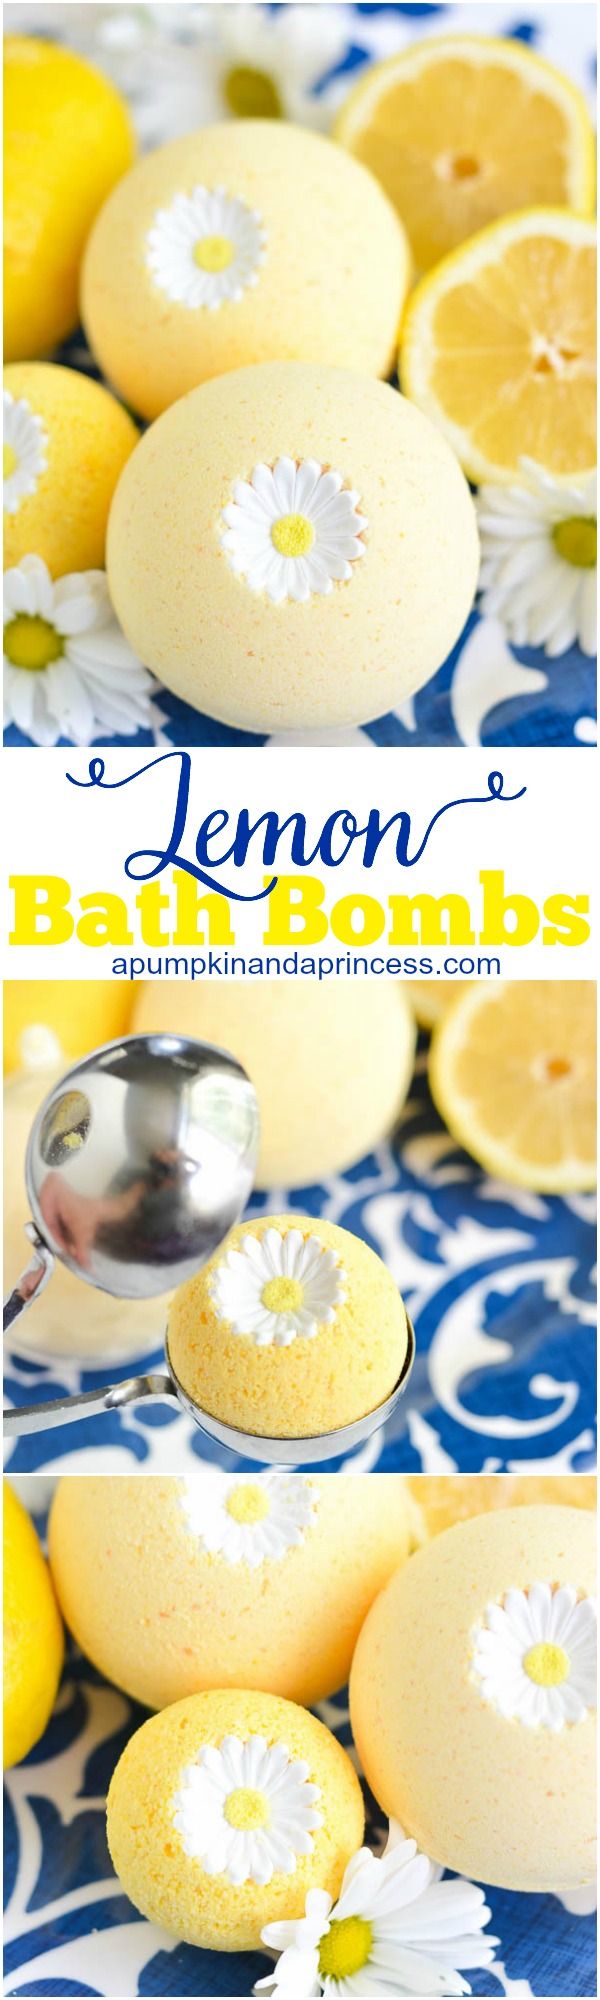 Homemade bath bomb made with lemon essential oil and a sugar daisy on top. Really simple to make with fun and add a personalization and homemade touch to your Mother's Day gift. 